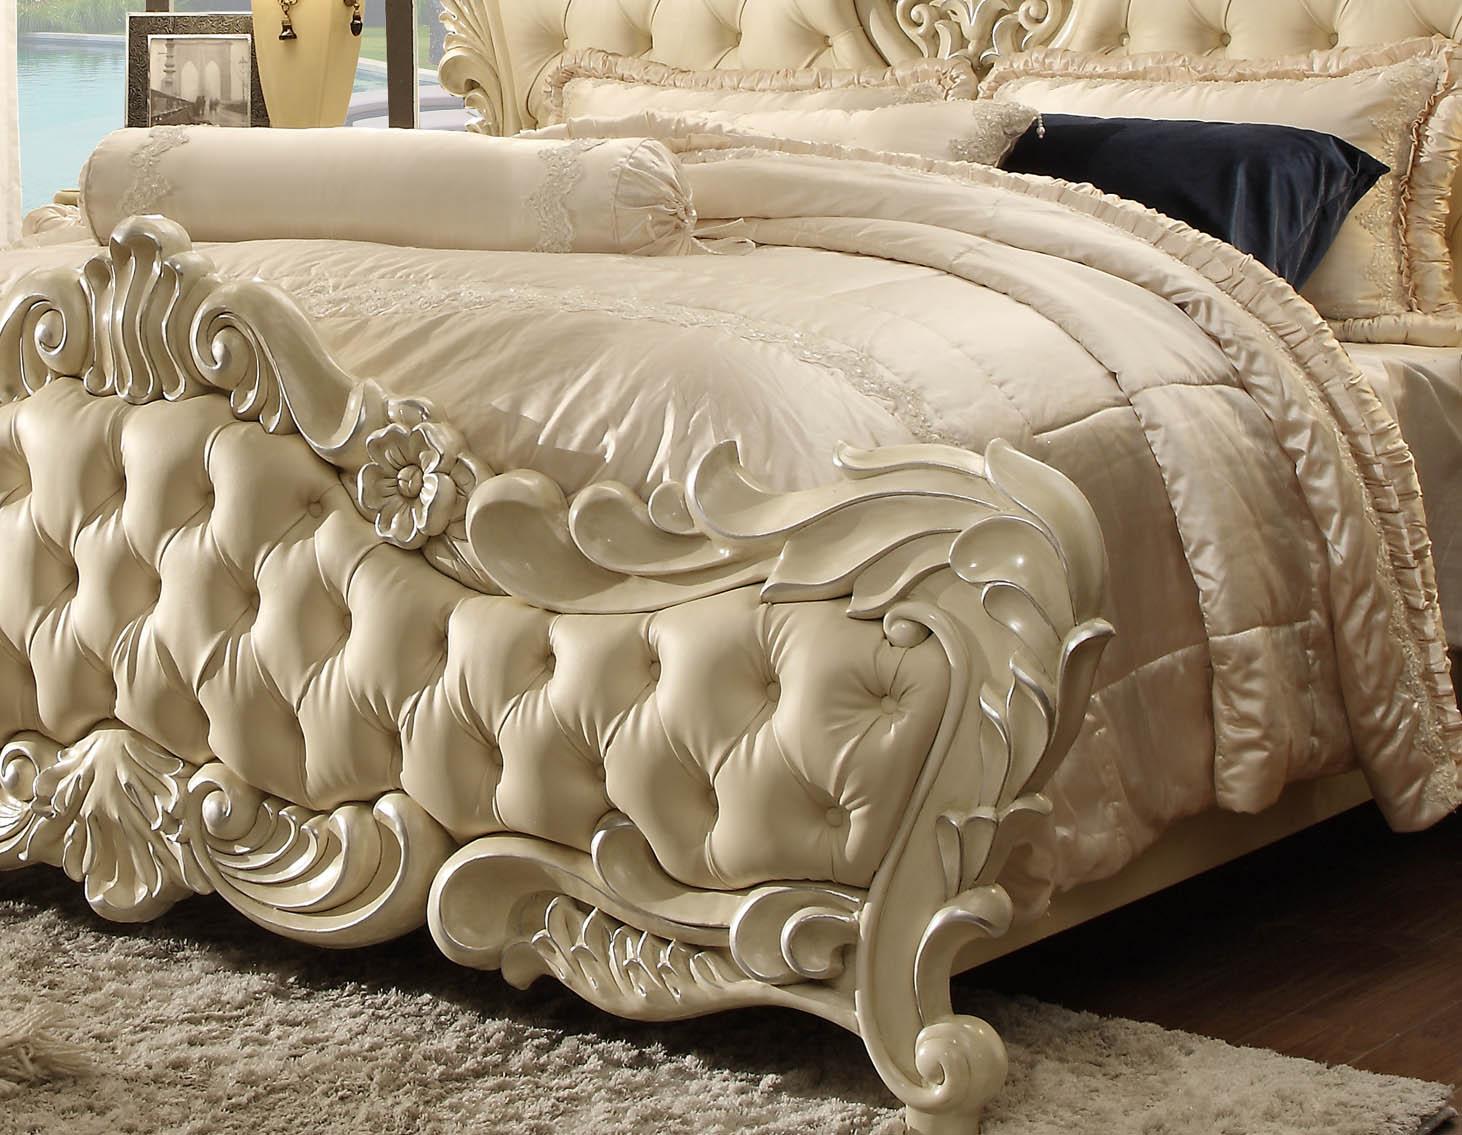 

    
Luxury Pearl Cream Carved Wood King Bed Traditional Homey Design HD-5800
